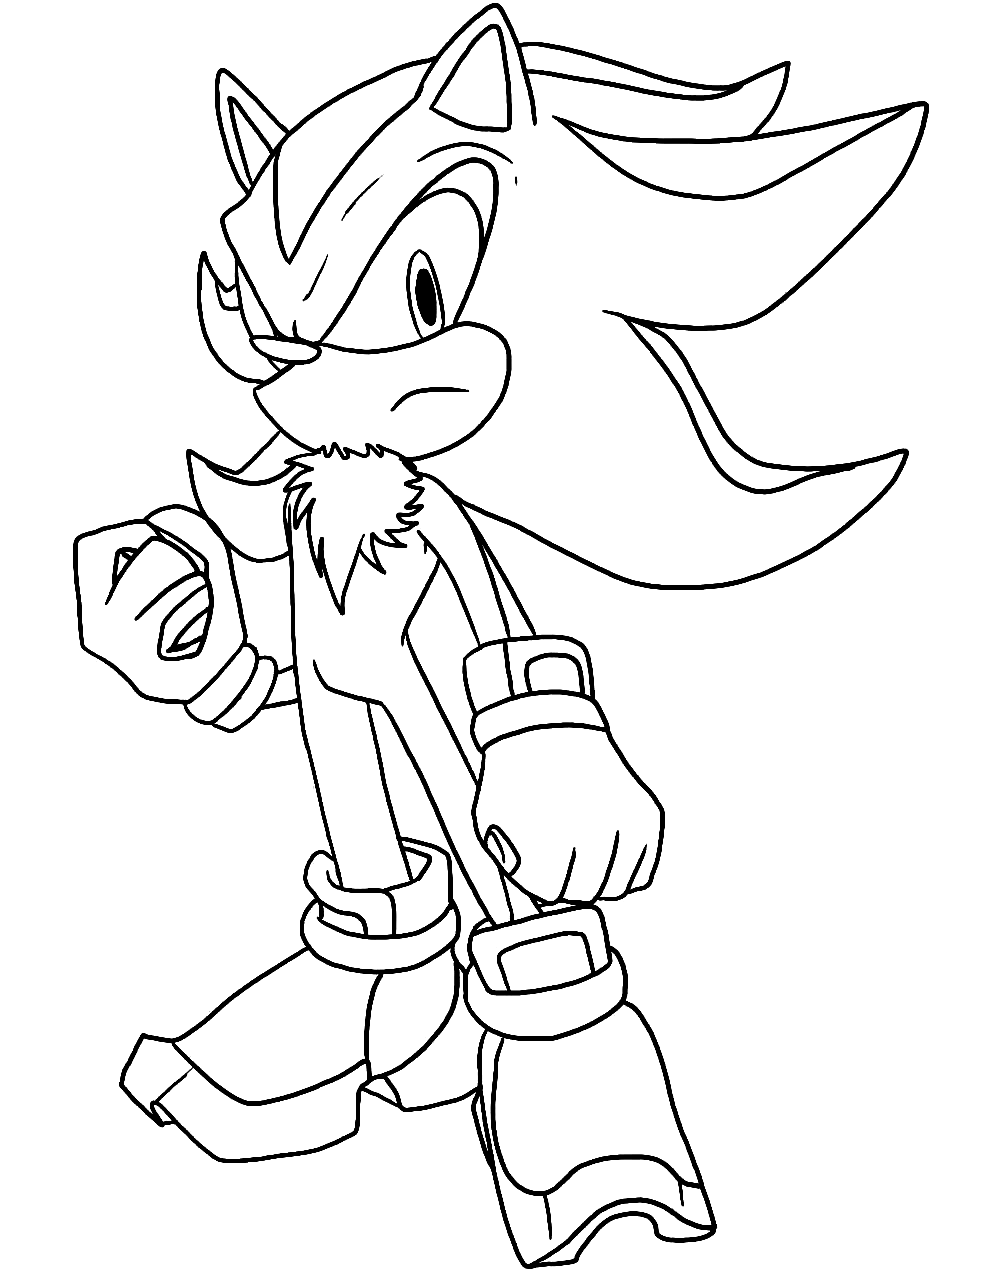 Shadow the hedgehog coloring pages printable for free download